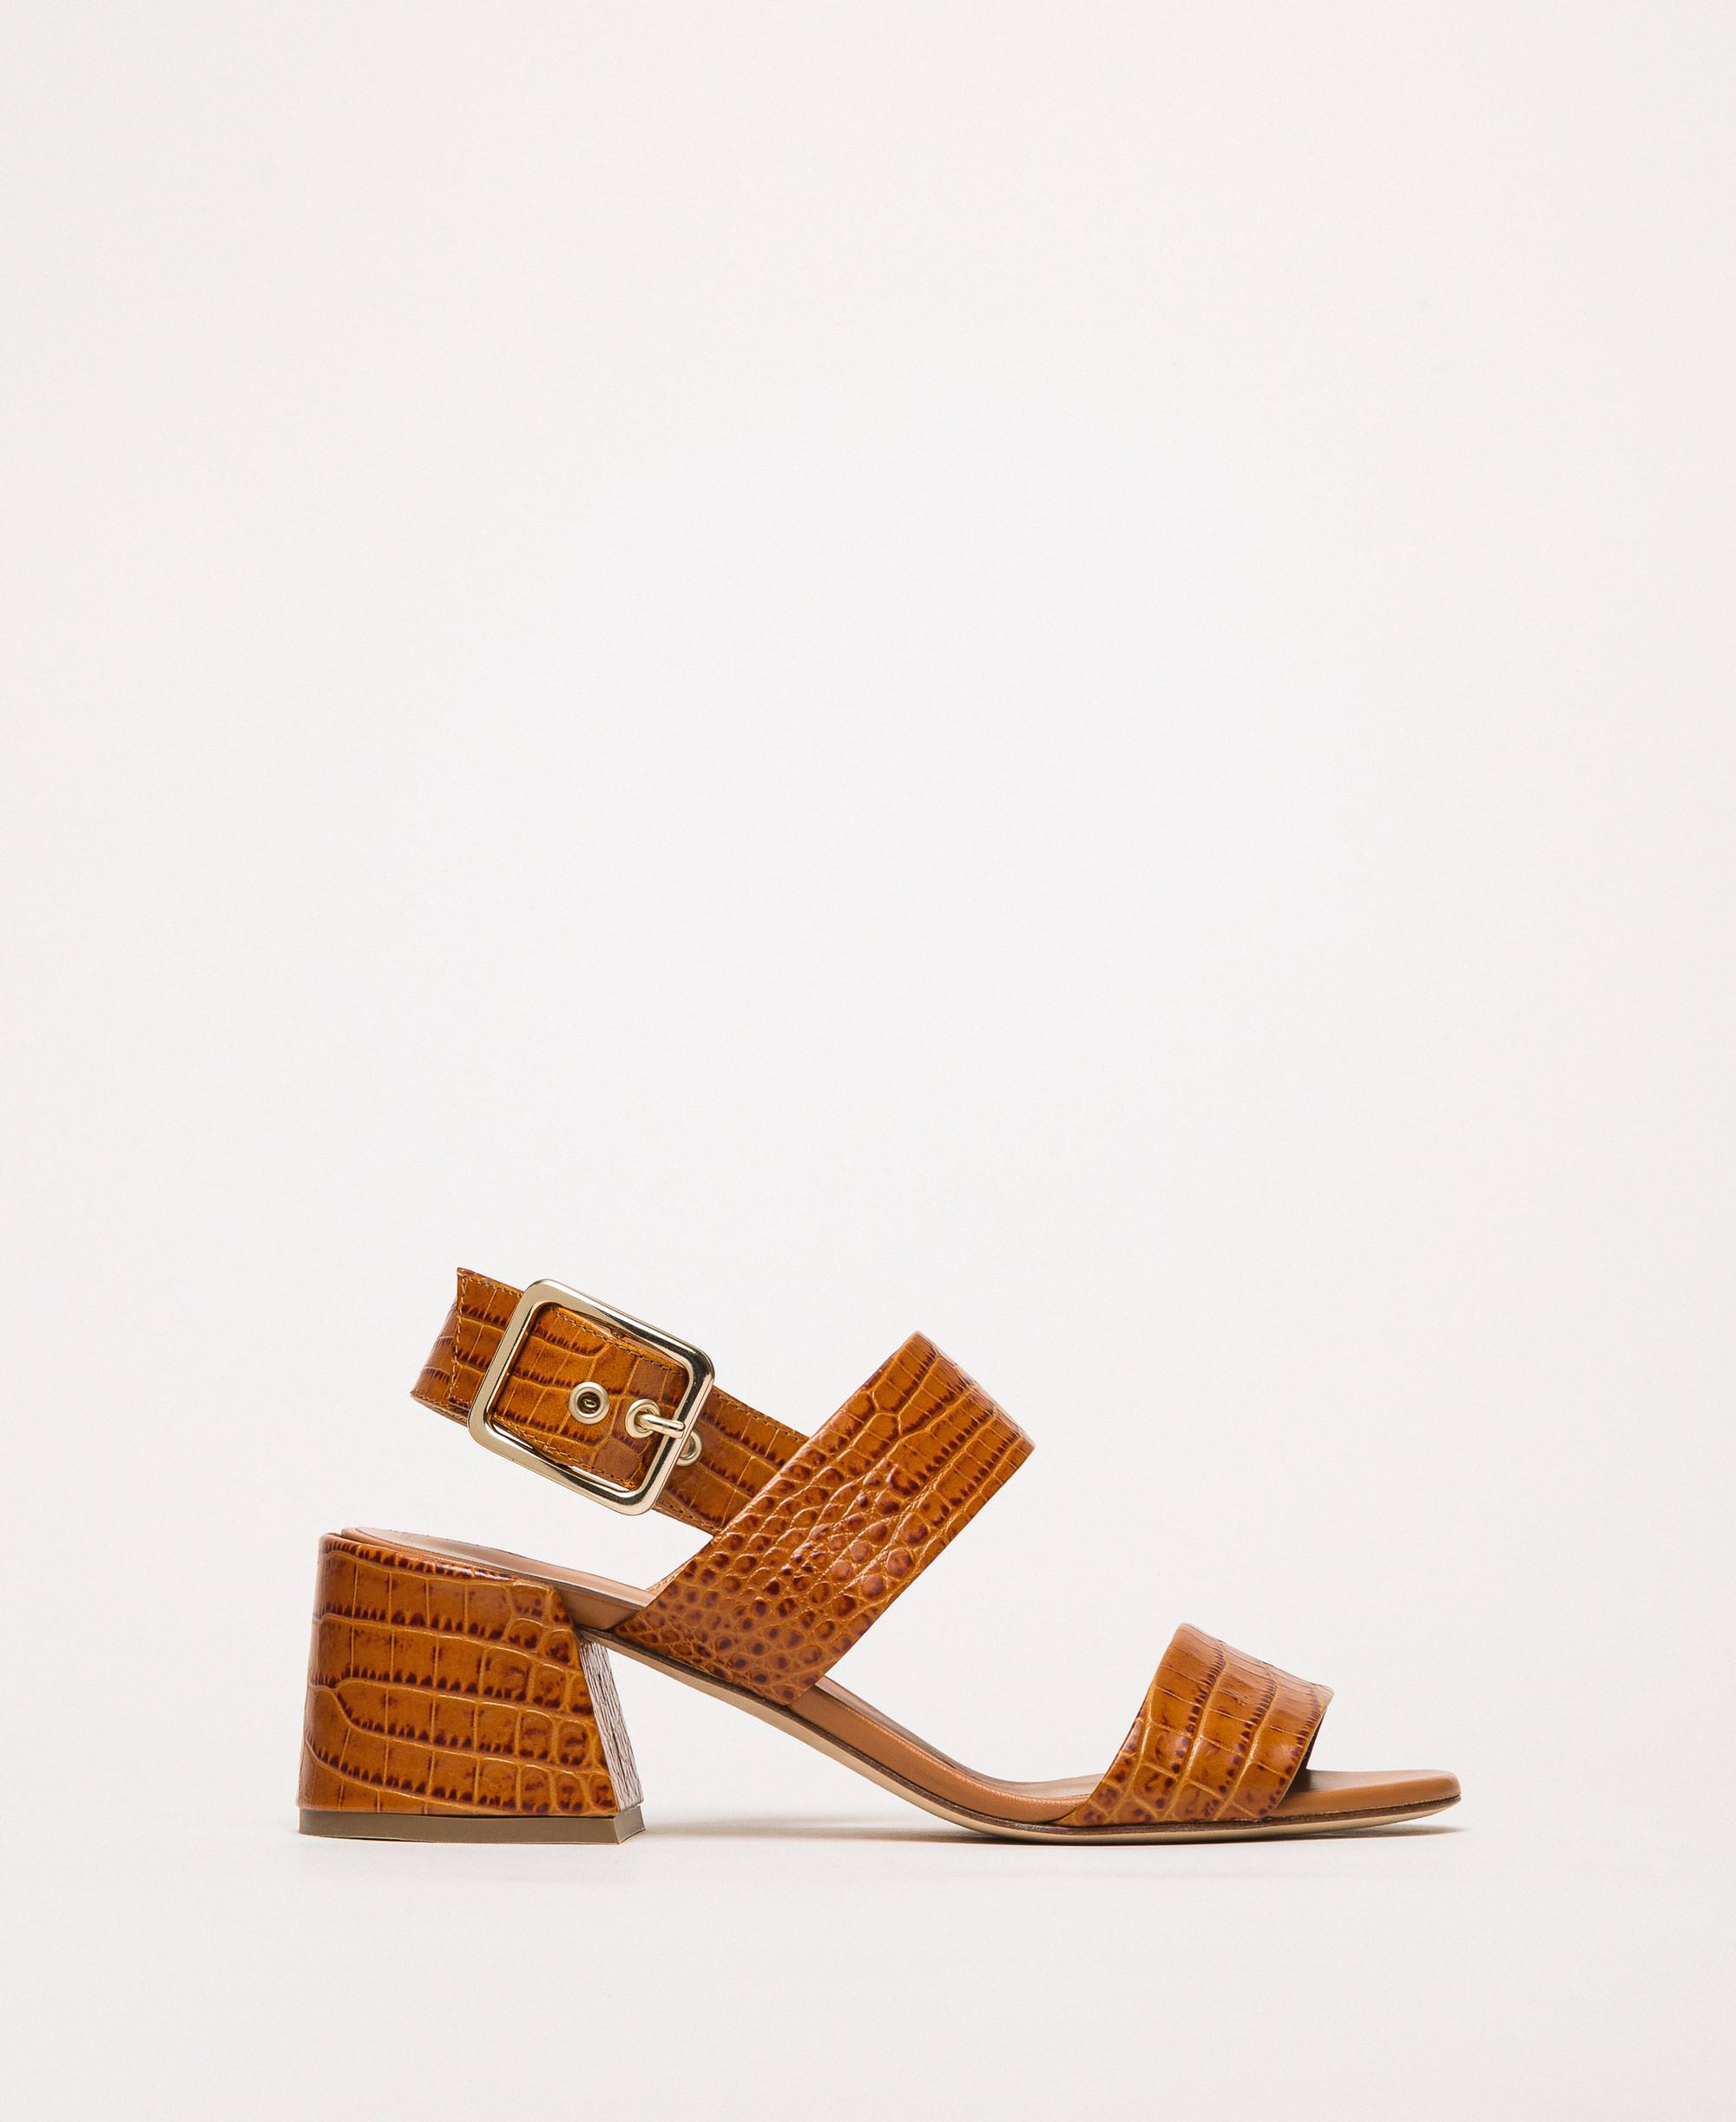 Leather sandals with croc print